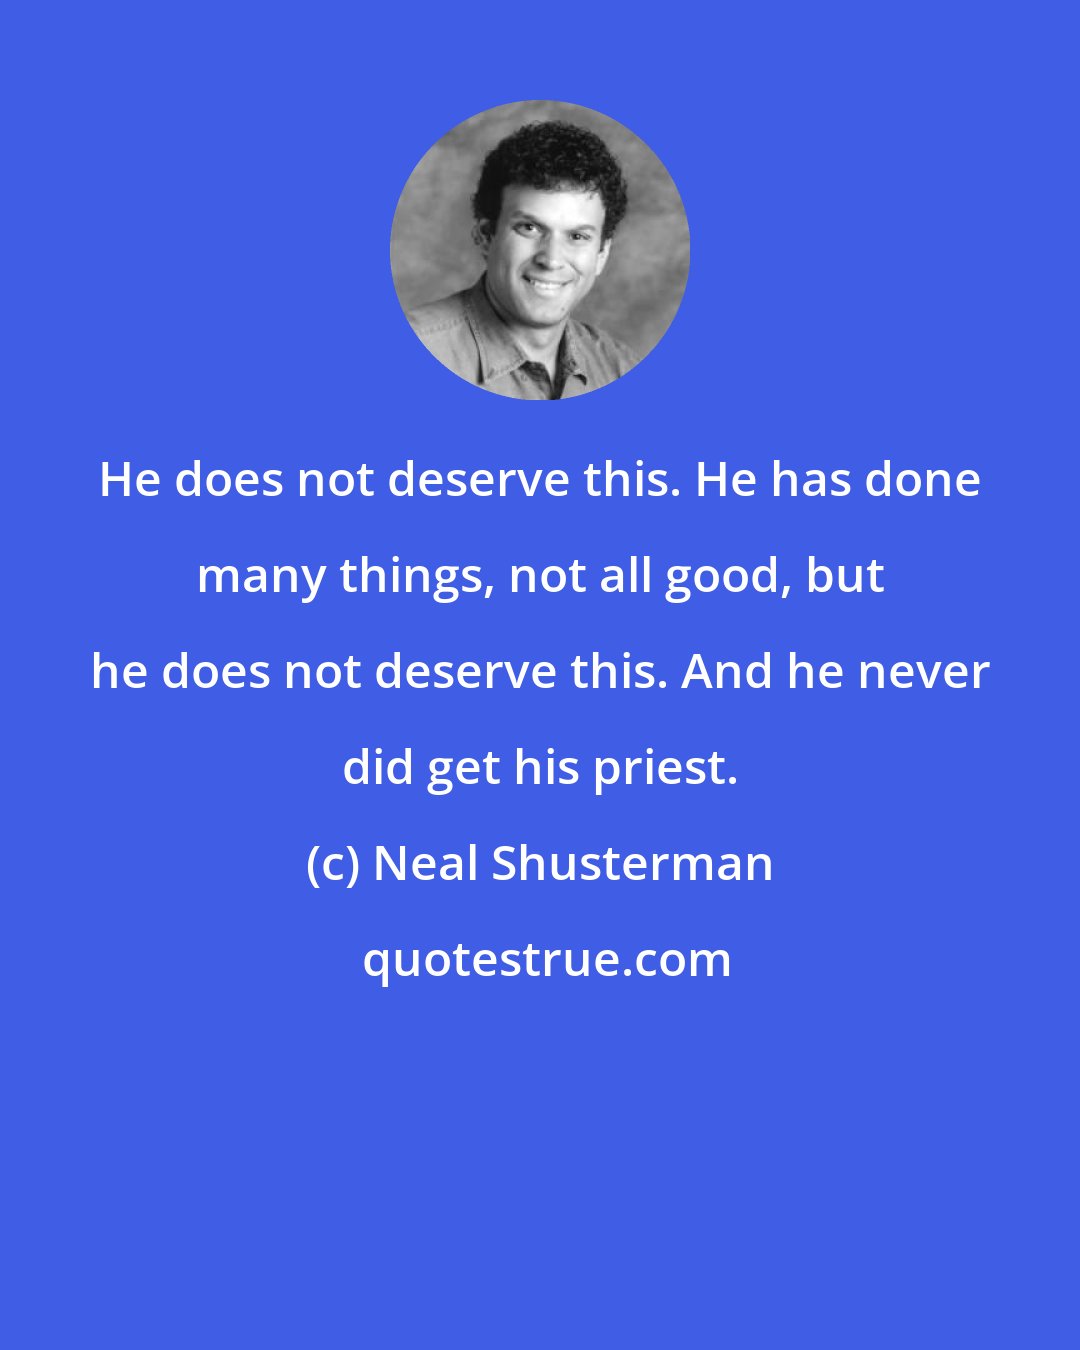 Neal Shusterman: He does not deserve this. He has done many things, not all good, but he does not deserve this. And he never did get his priest.